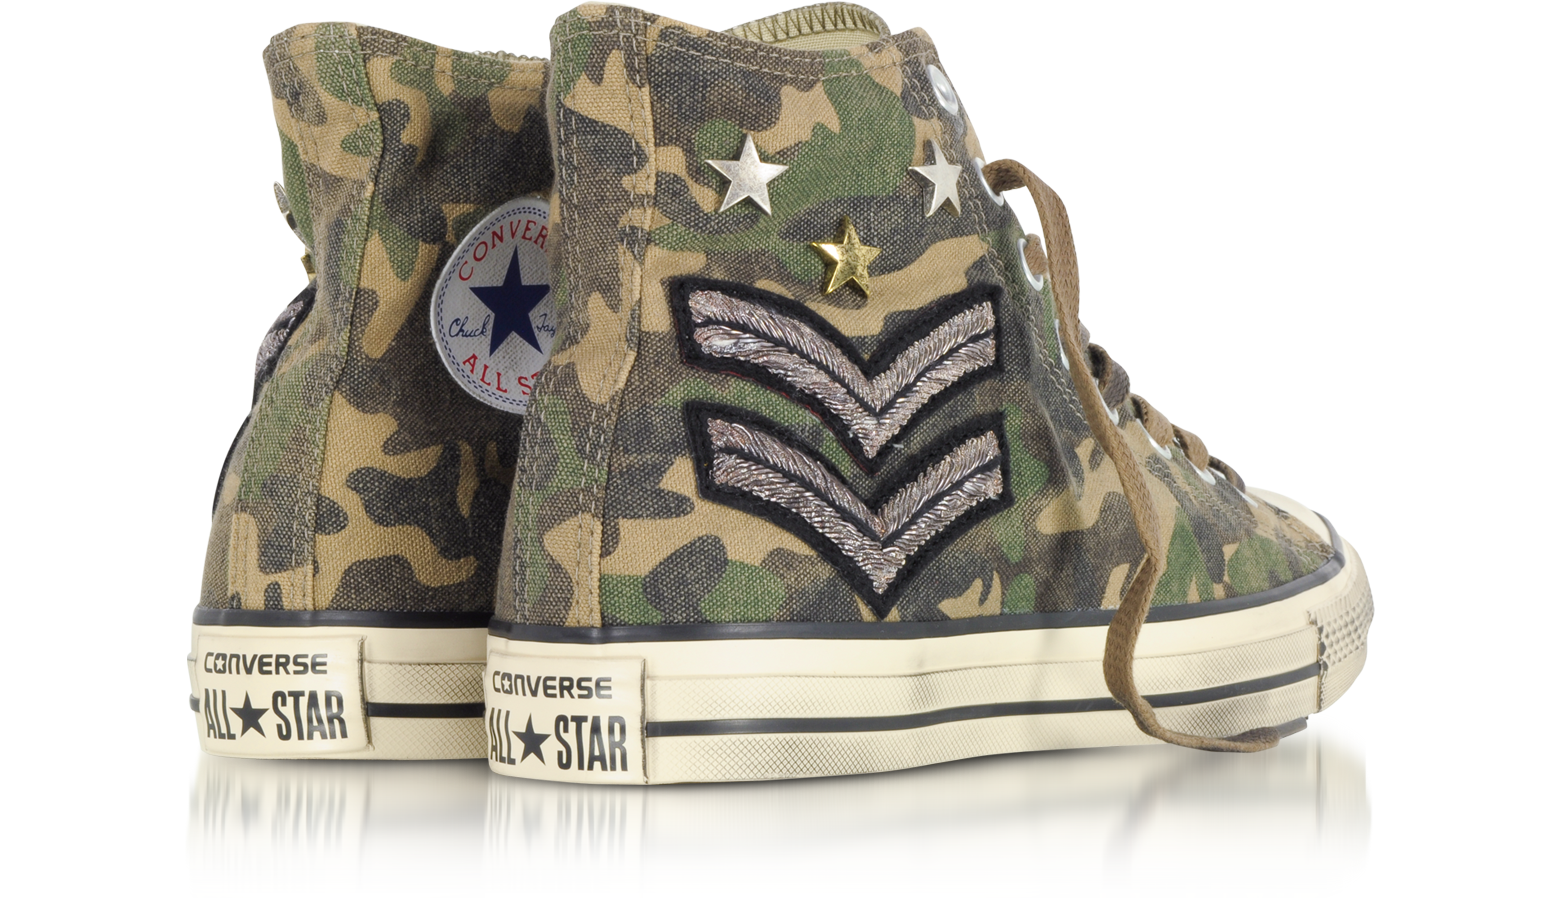 converse all star camouflage limited edition